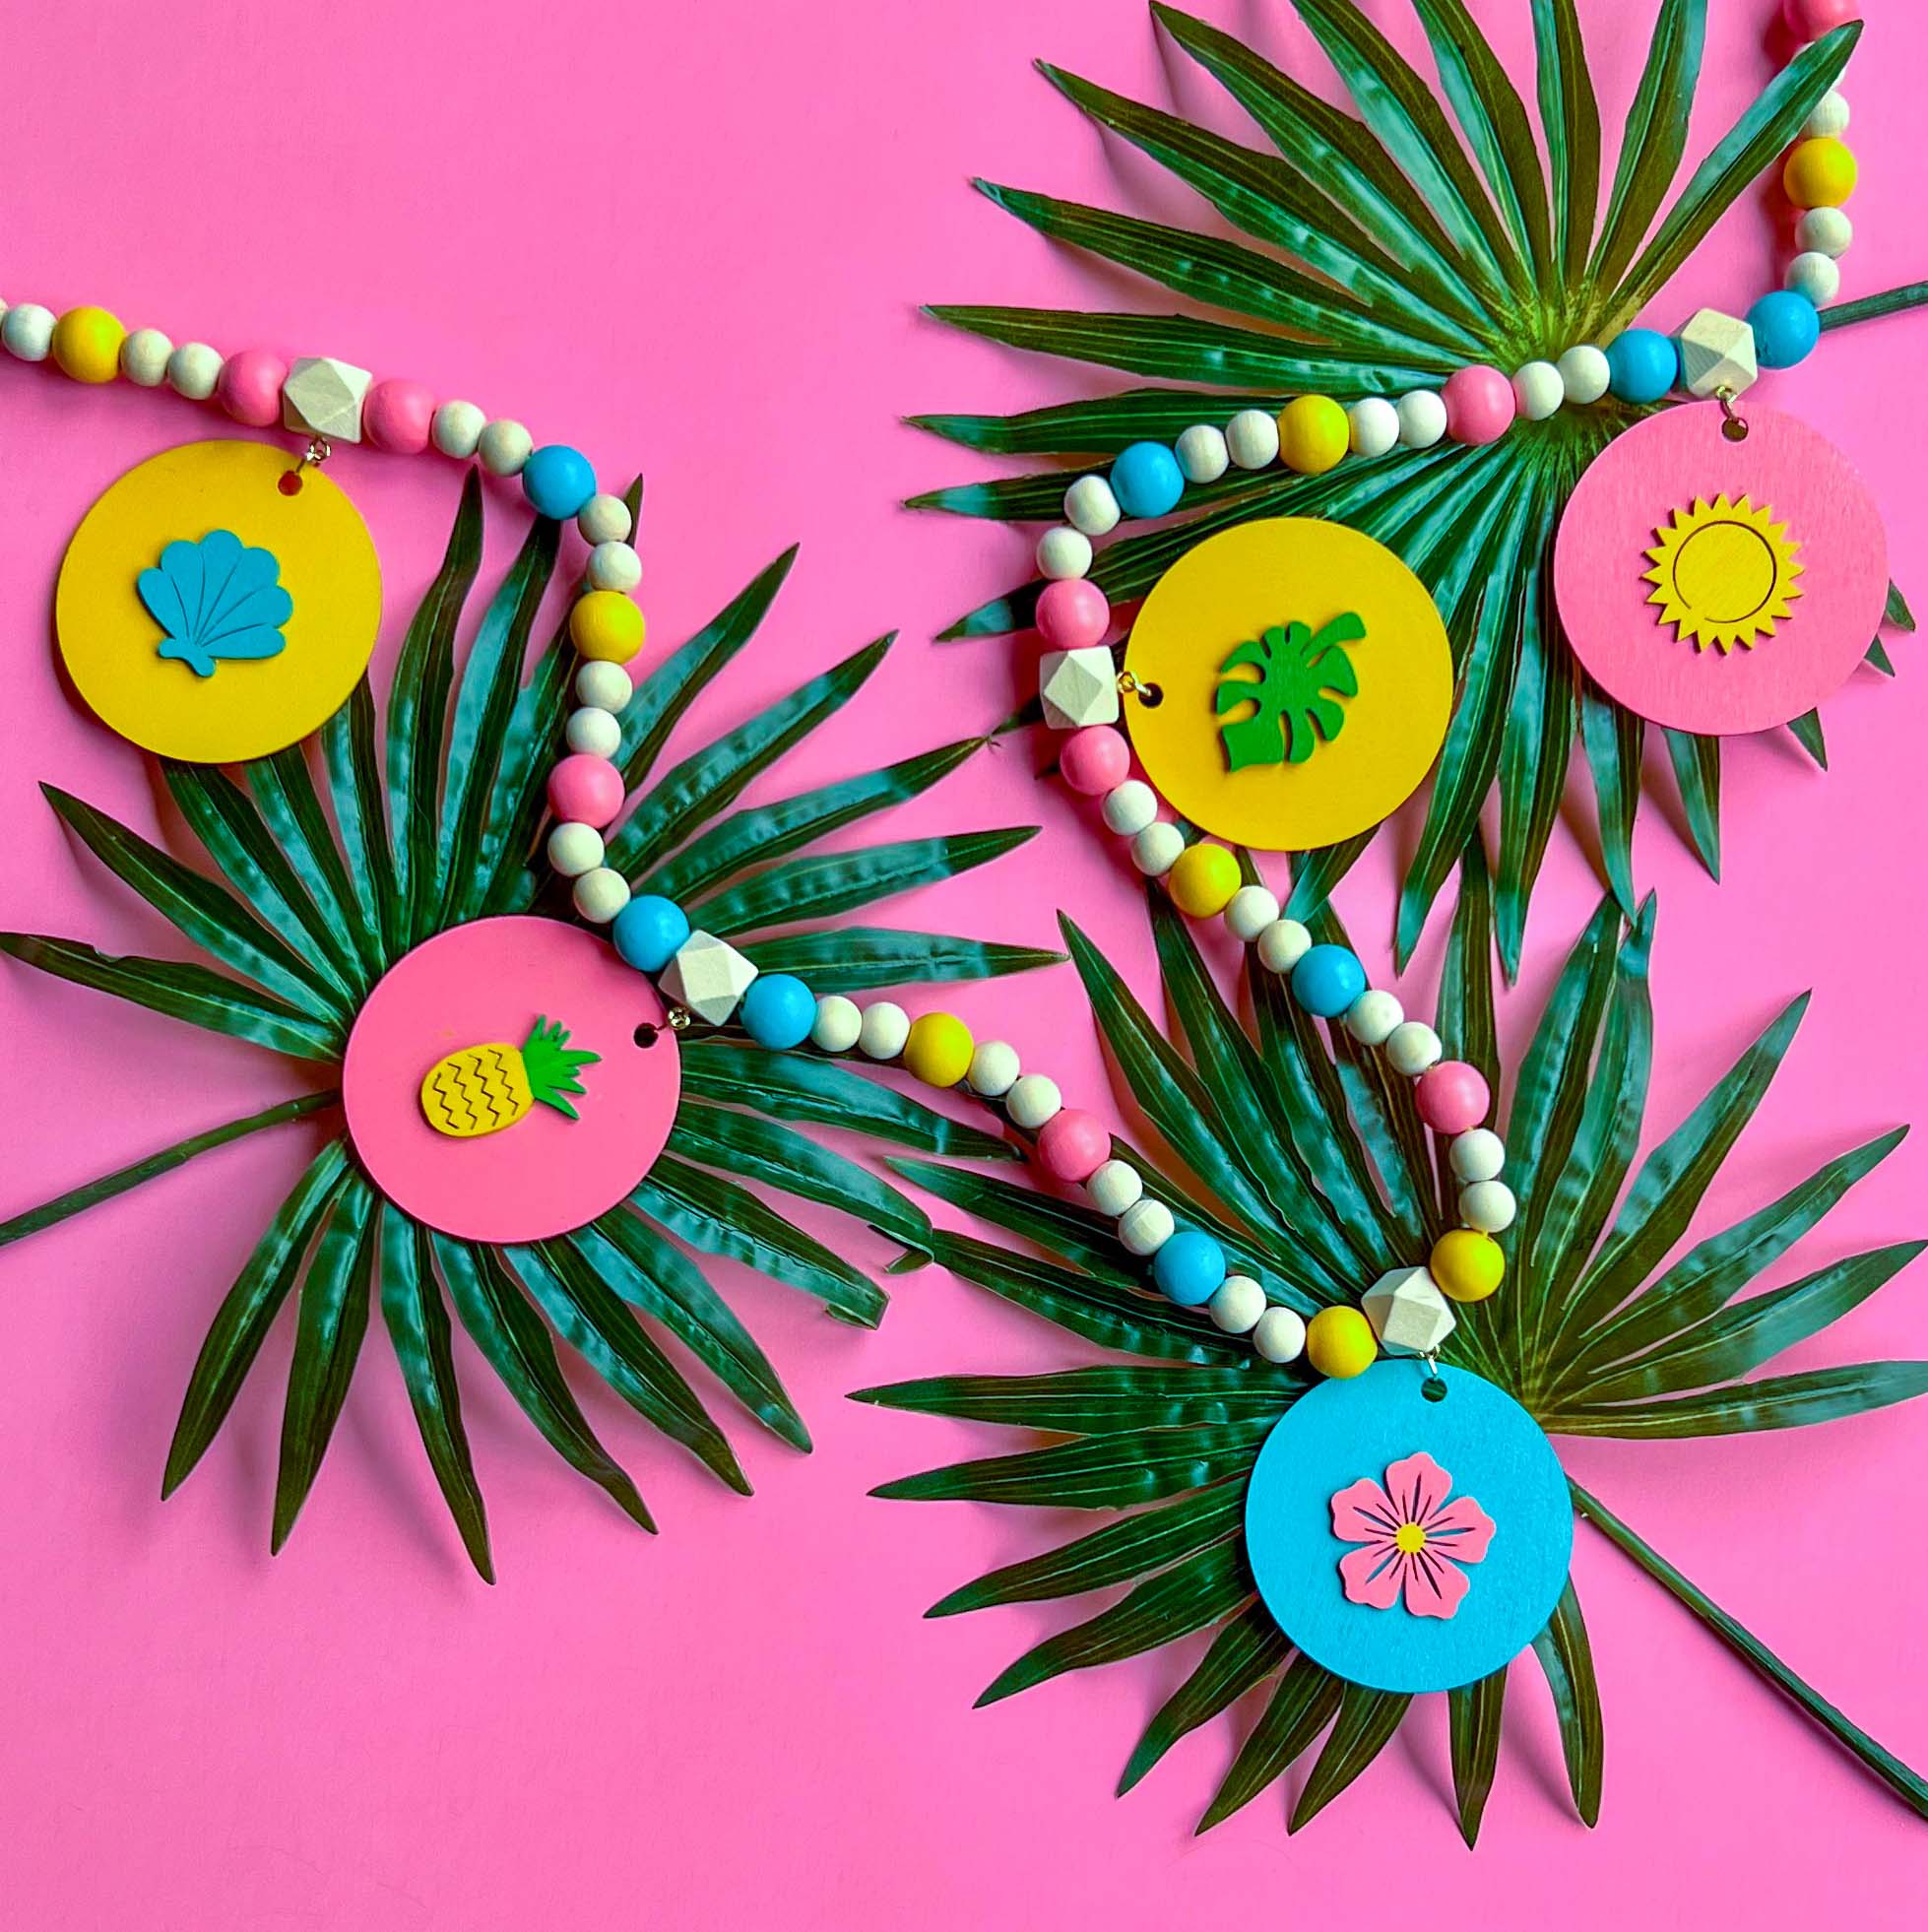 Summer Vacay Handmade Garland. The garland features wood circles with a tropical themed shape: seashells, pineapple, flower, monstera leaf, the sun. Shapes hang from wood beads. Summer tropical seasonal decoration or gift.